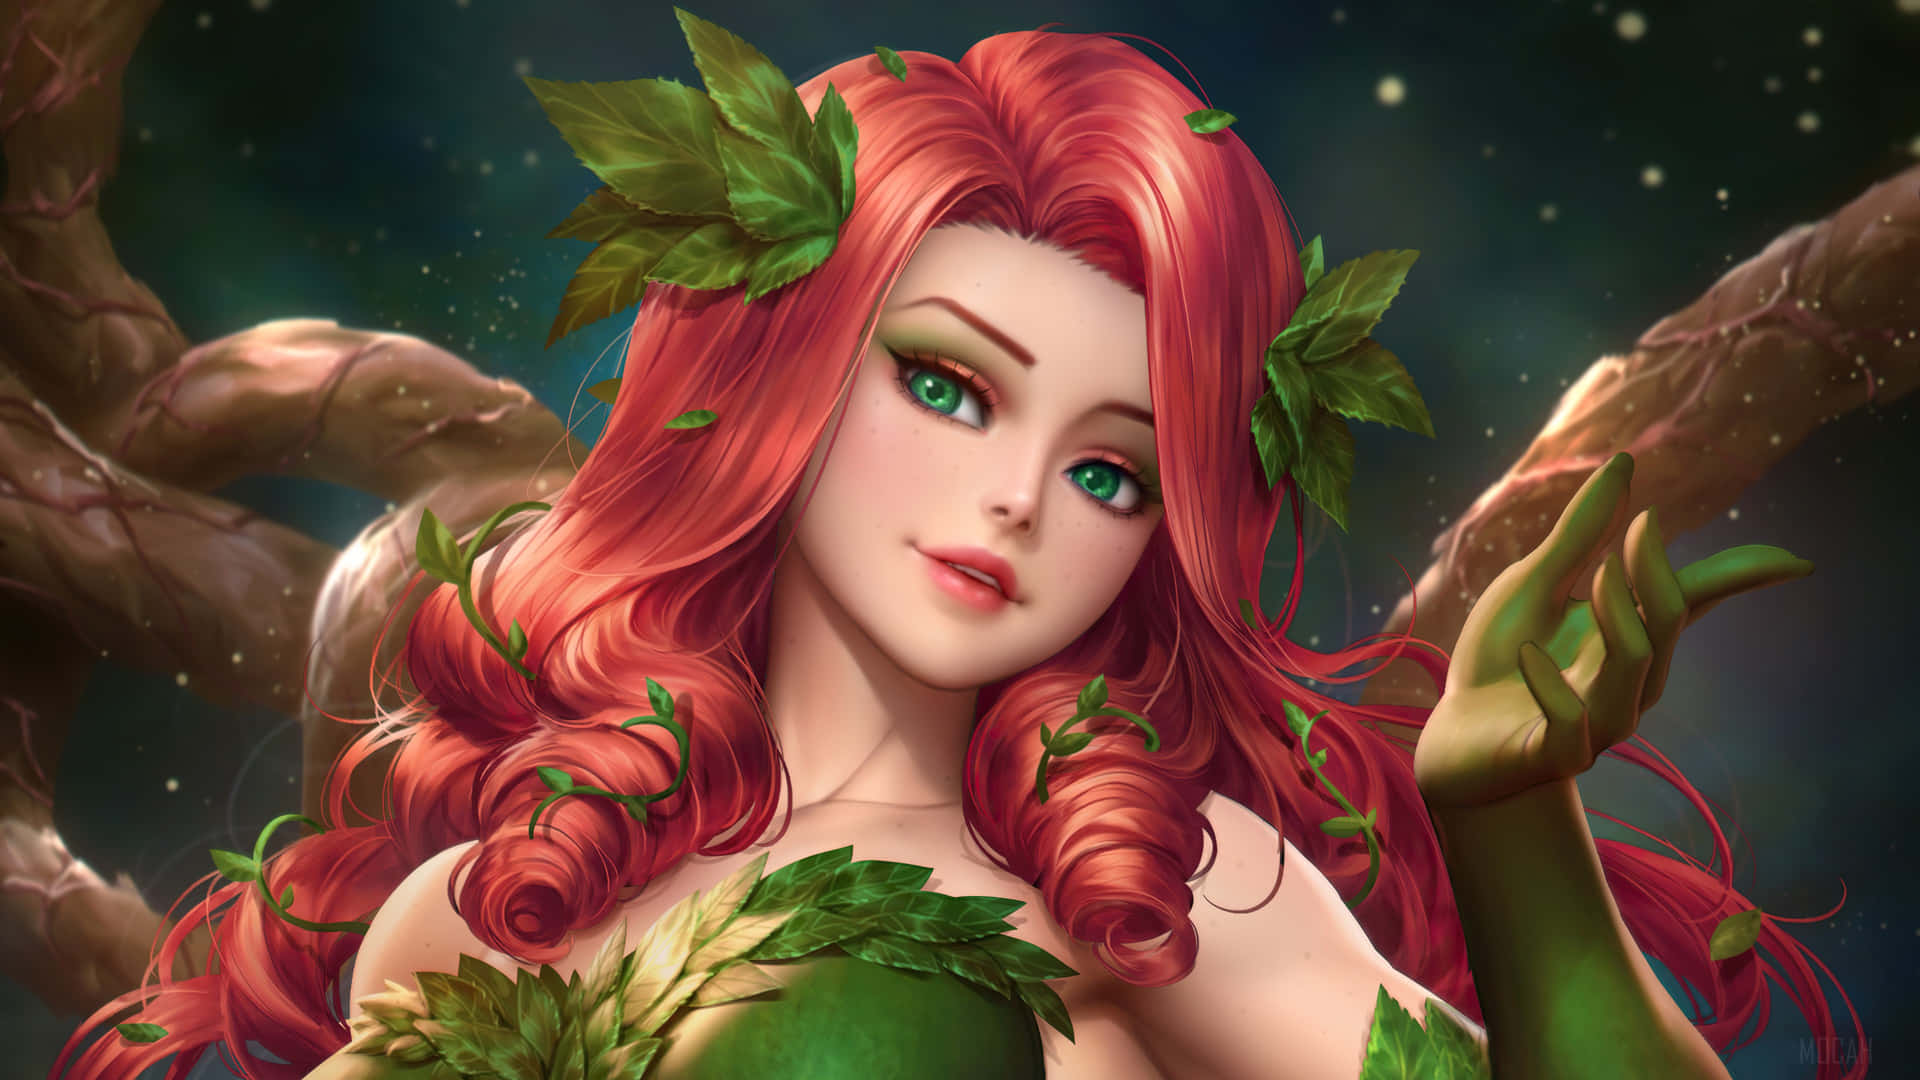 A Girl In Green Leaves With Long Red Hair